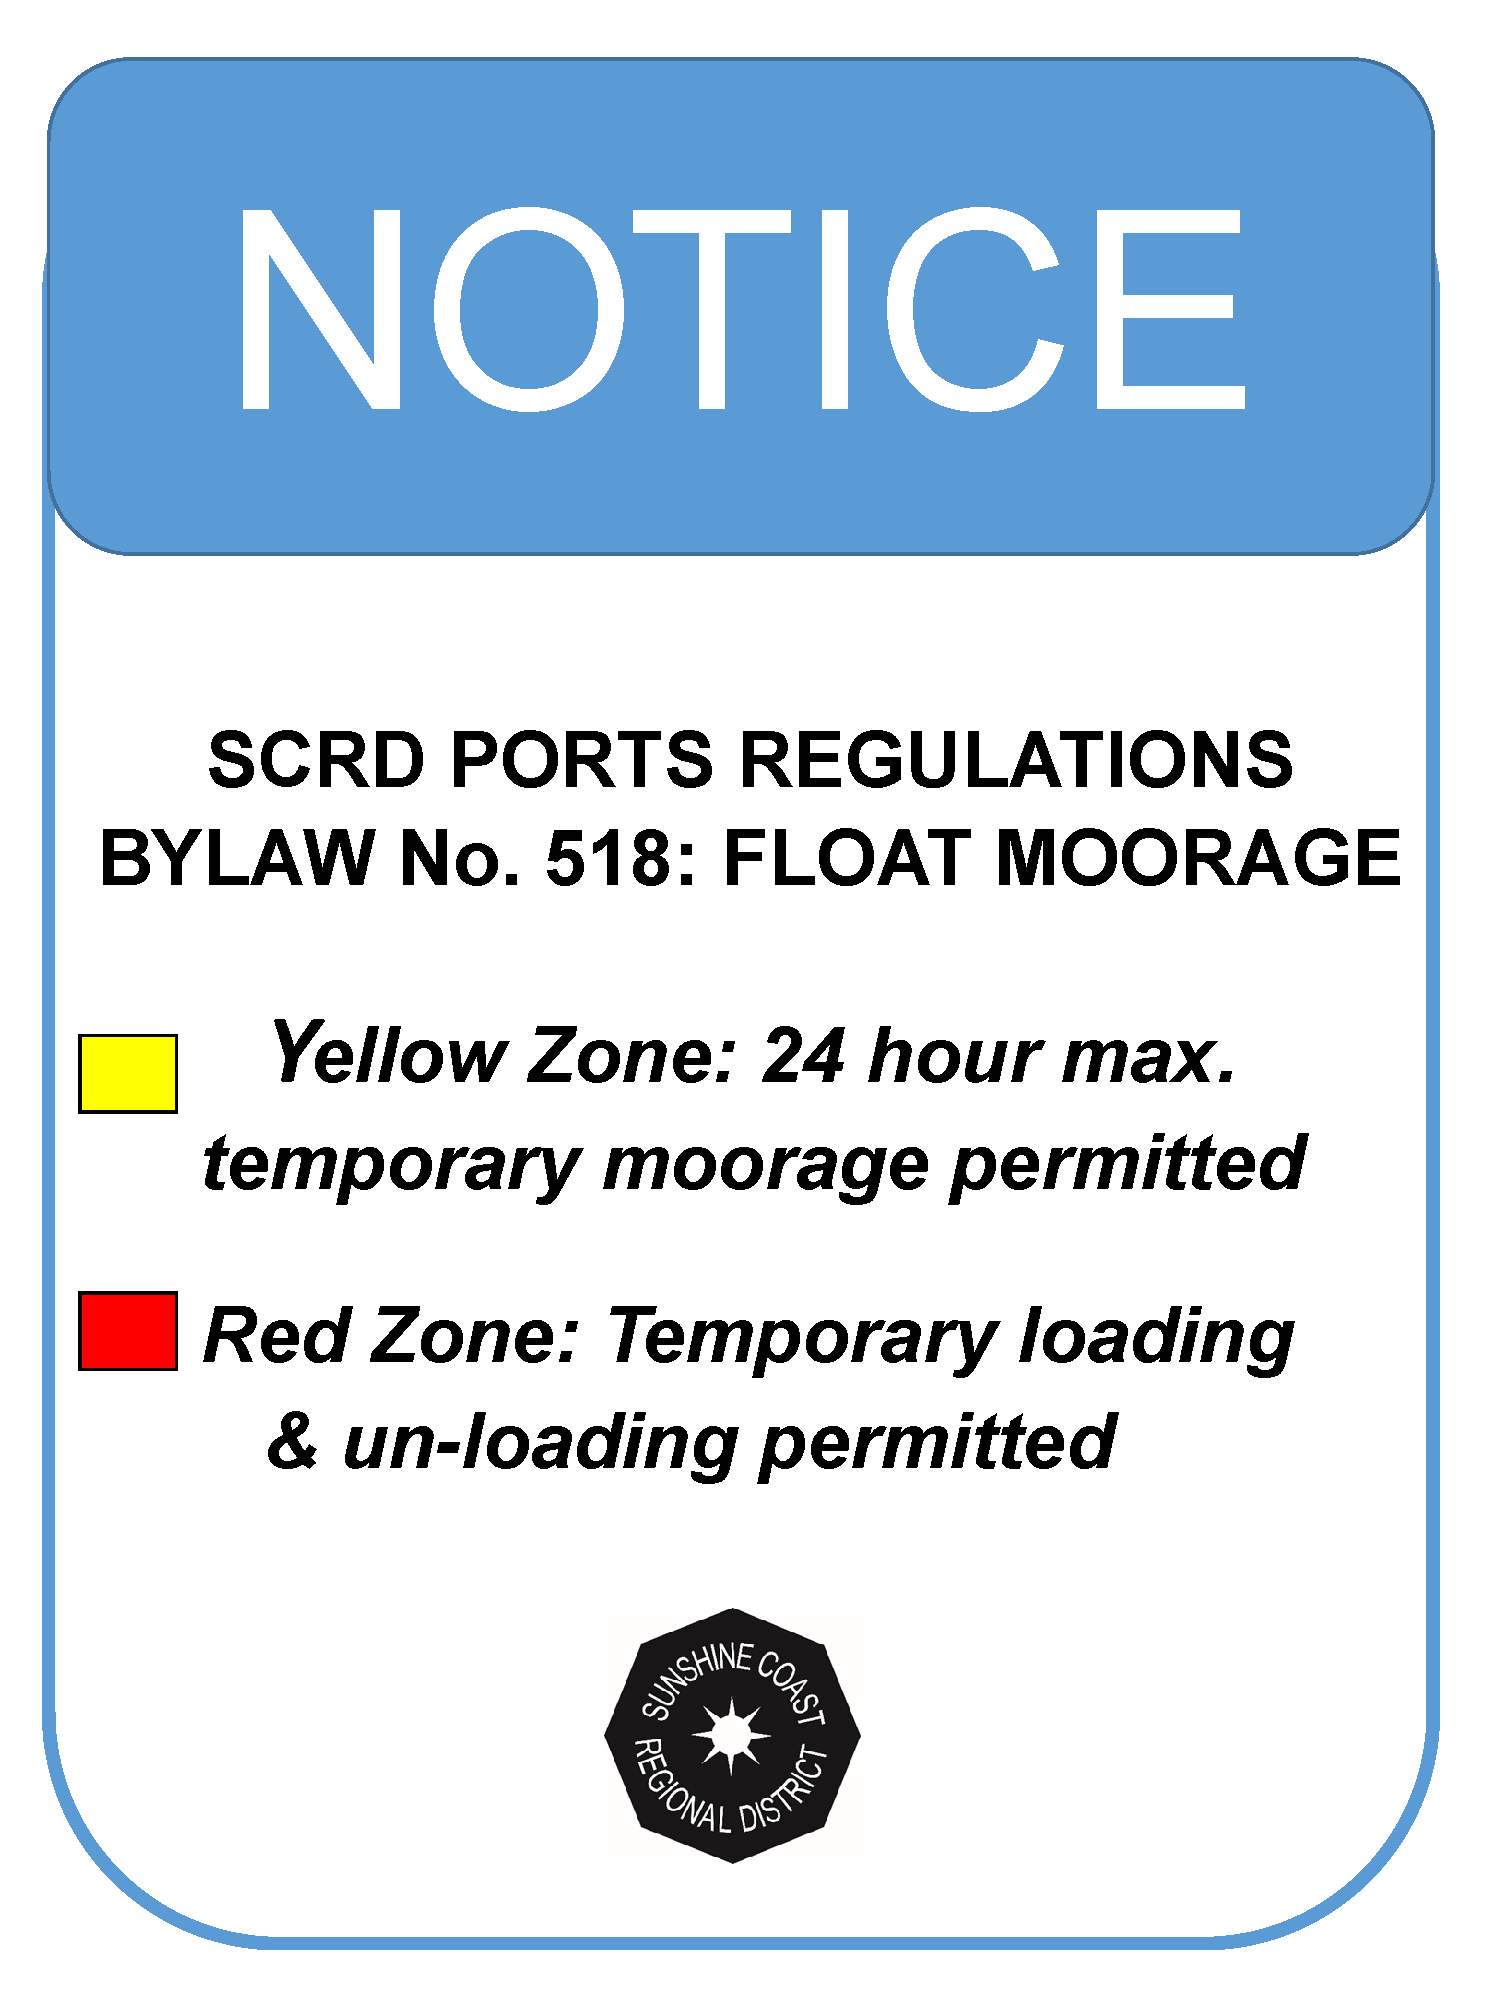 Image of Notice Sign for docks.